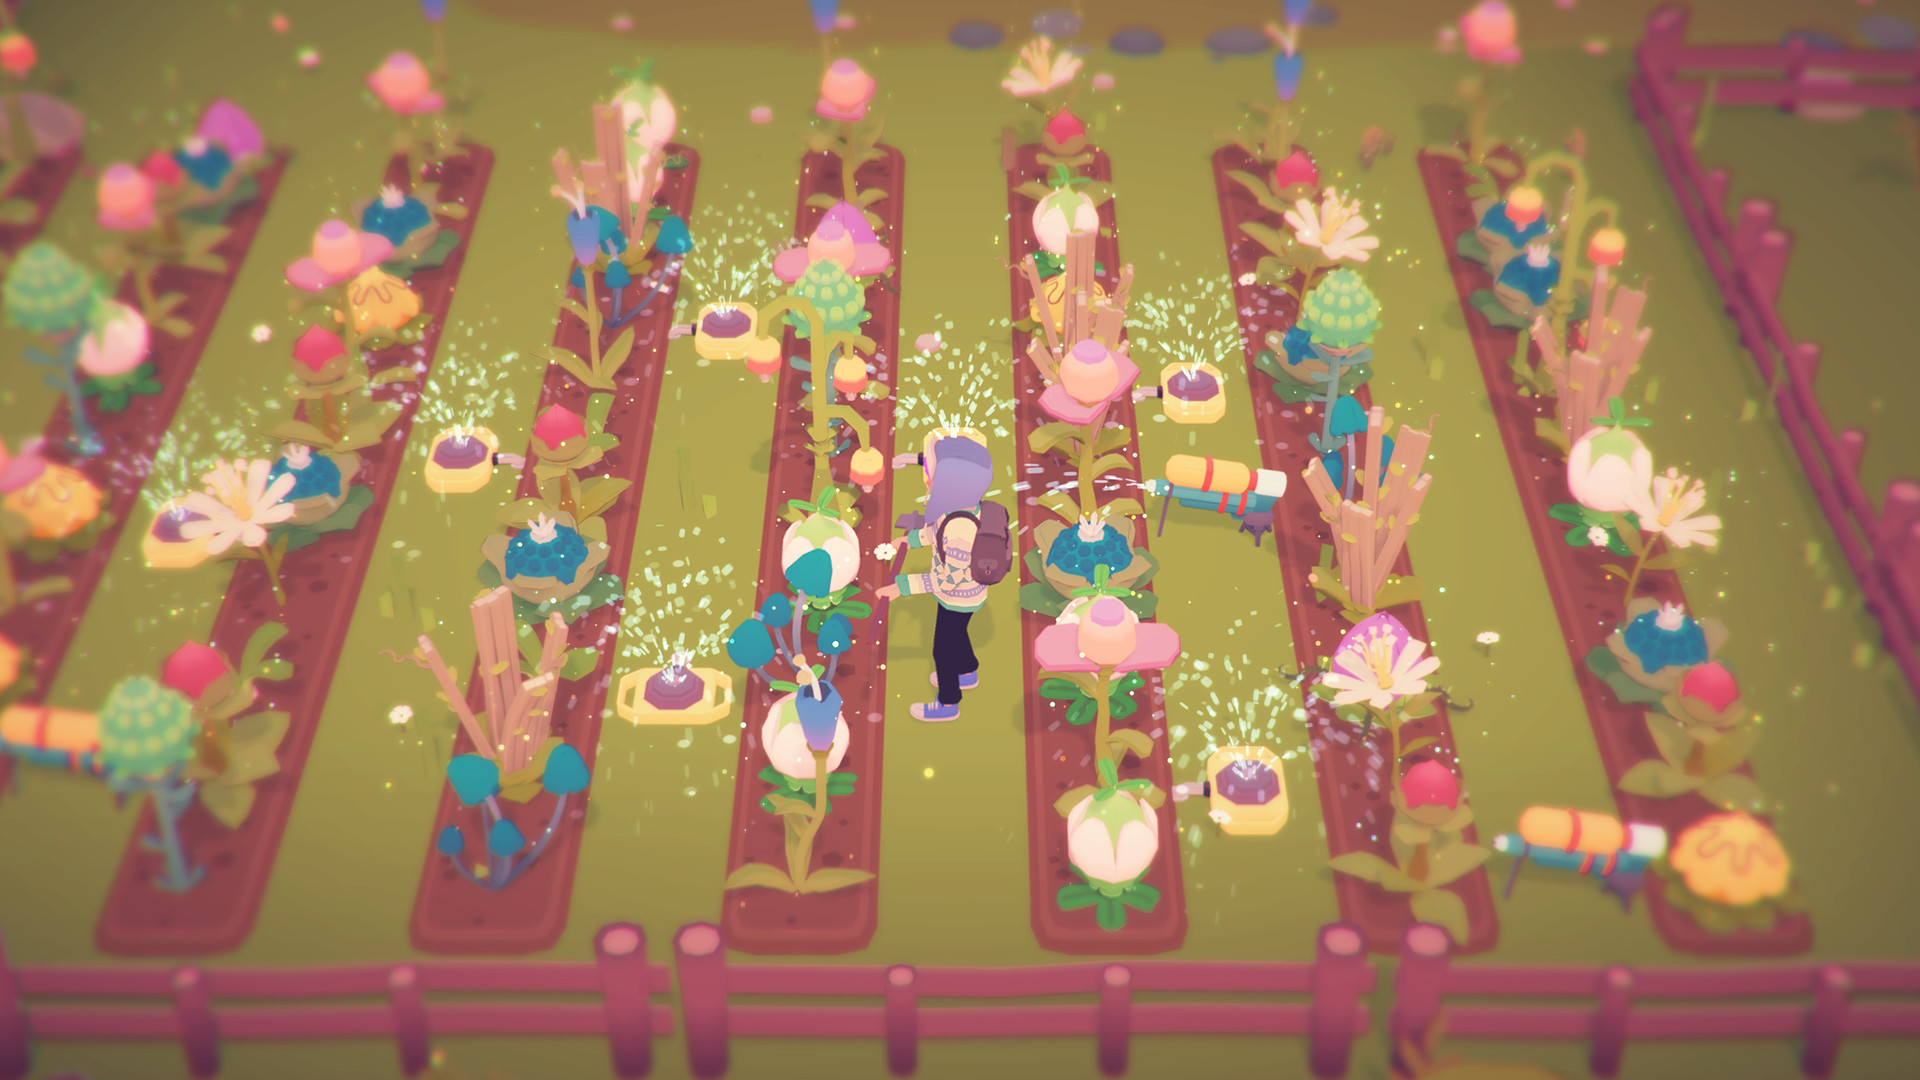 Ooblets – July 15 (Xbox Game Preview)